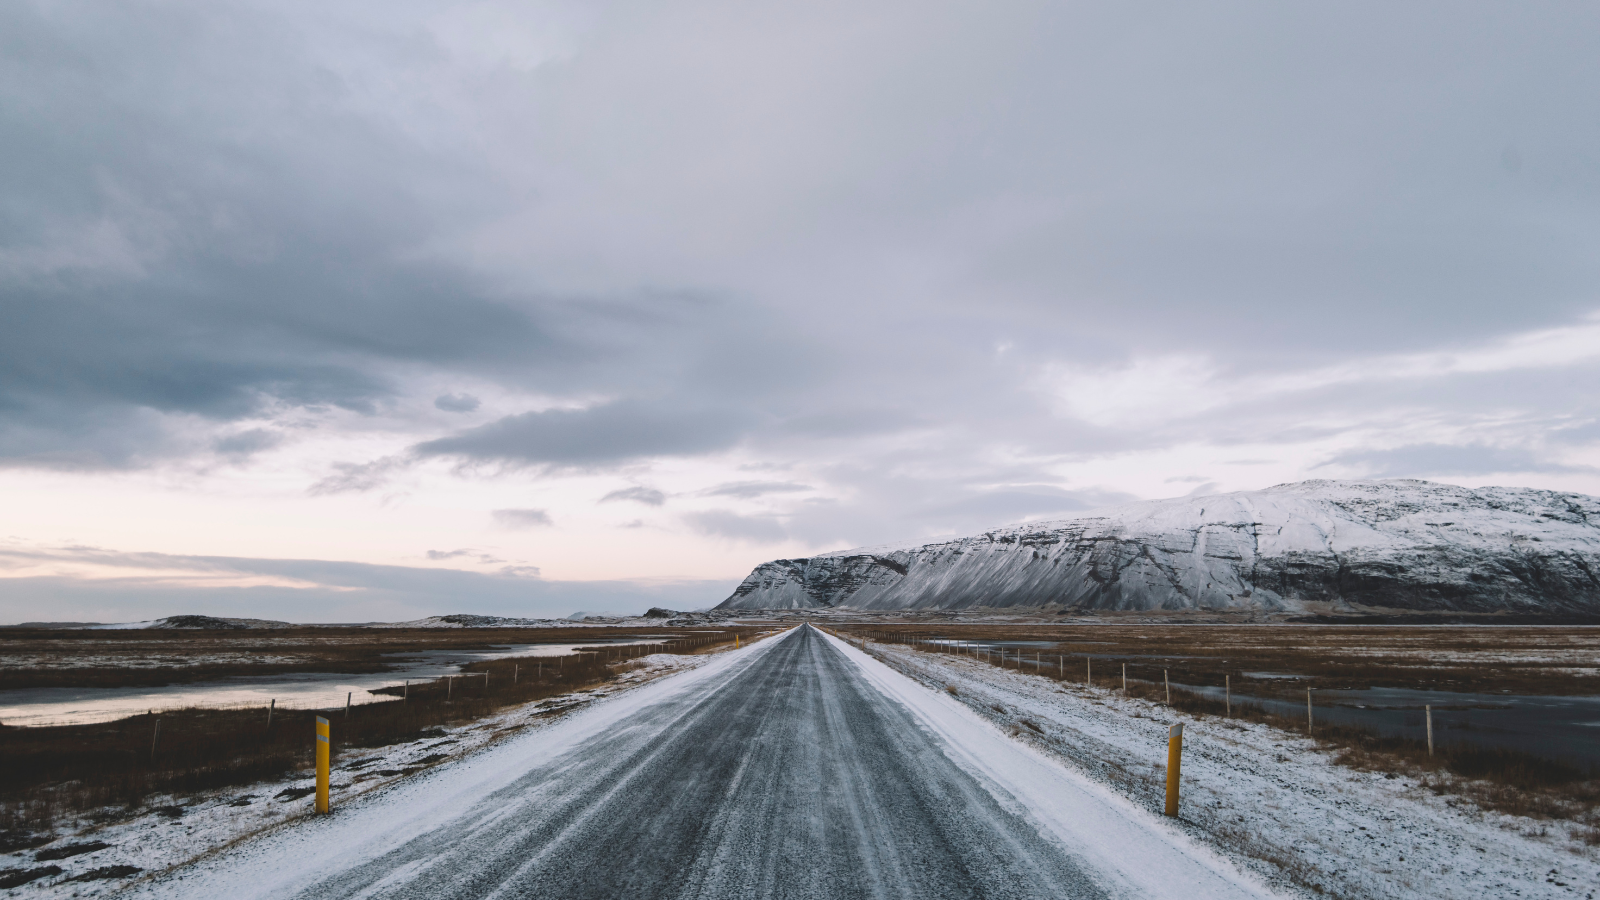 An icy road in Iceland reaching towards a snow-covered mountain on the horizon.